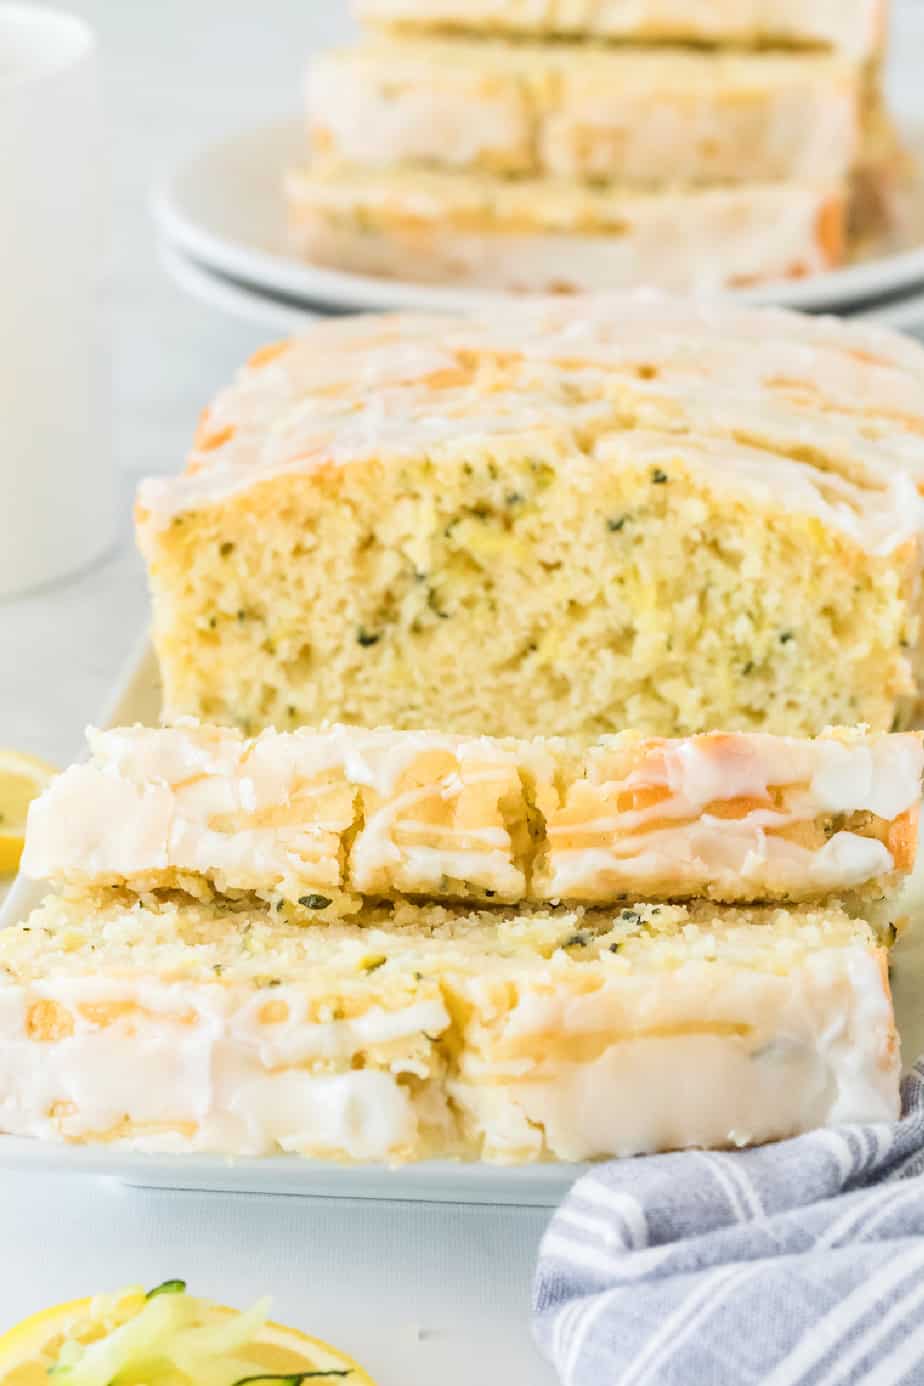 Lemon zucchini cake sliced from a large loaf with glaze on top and zucchini speckled in the cake crumb